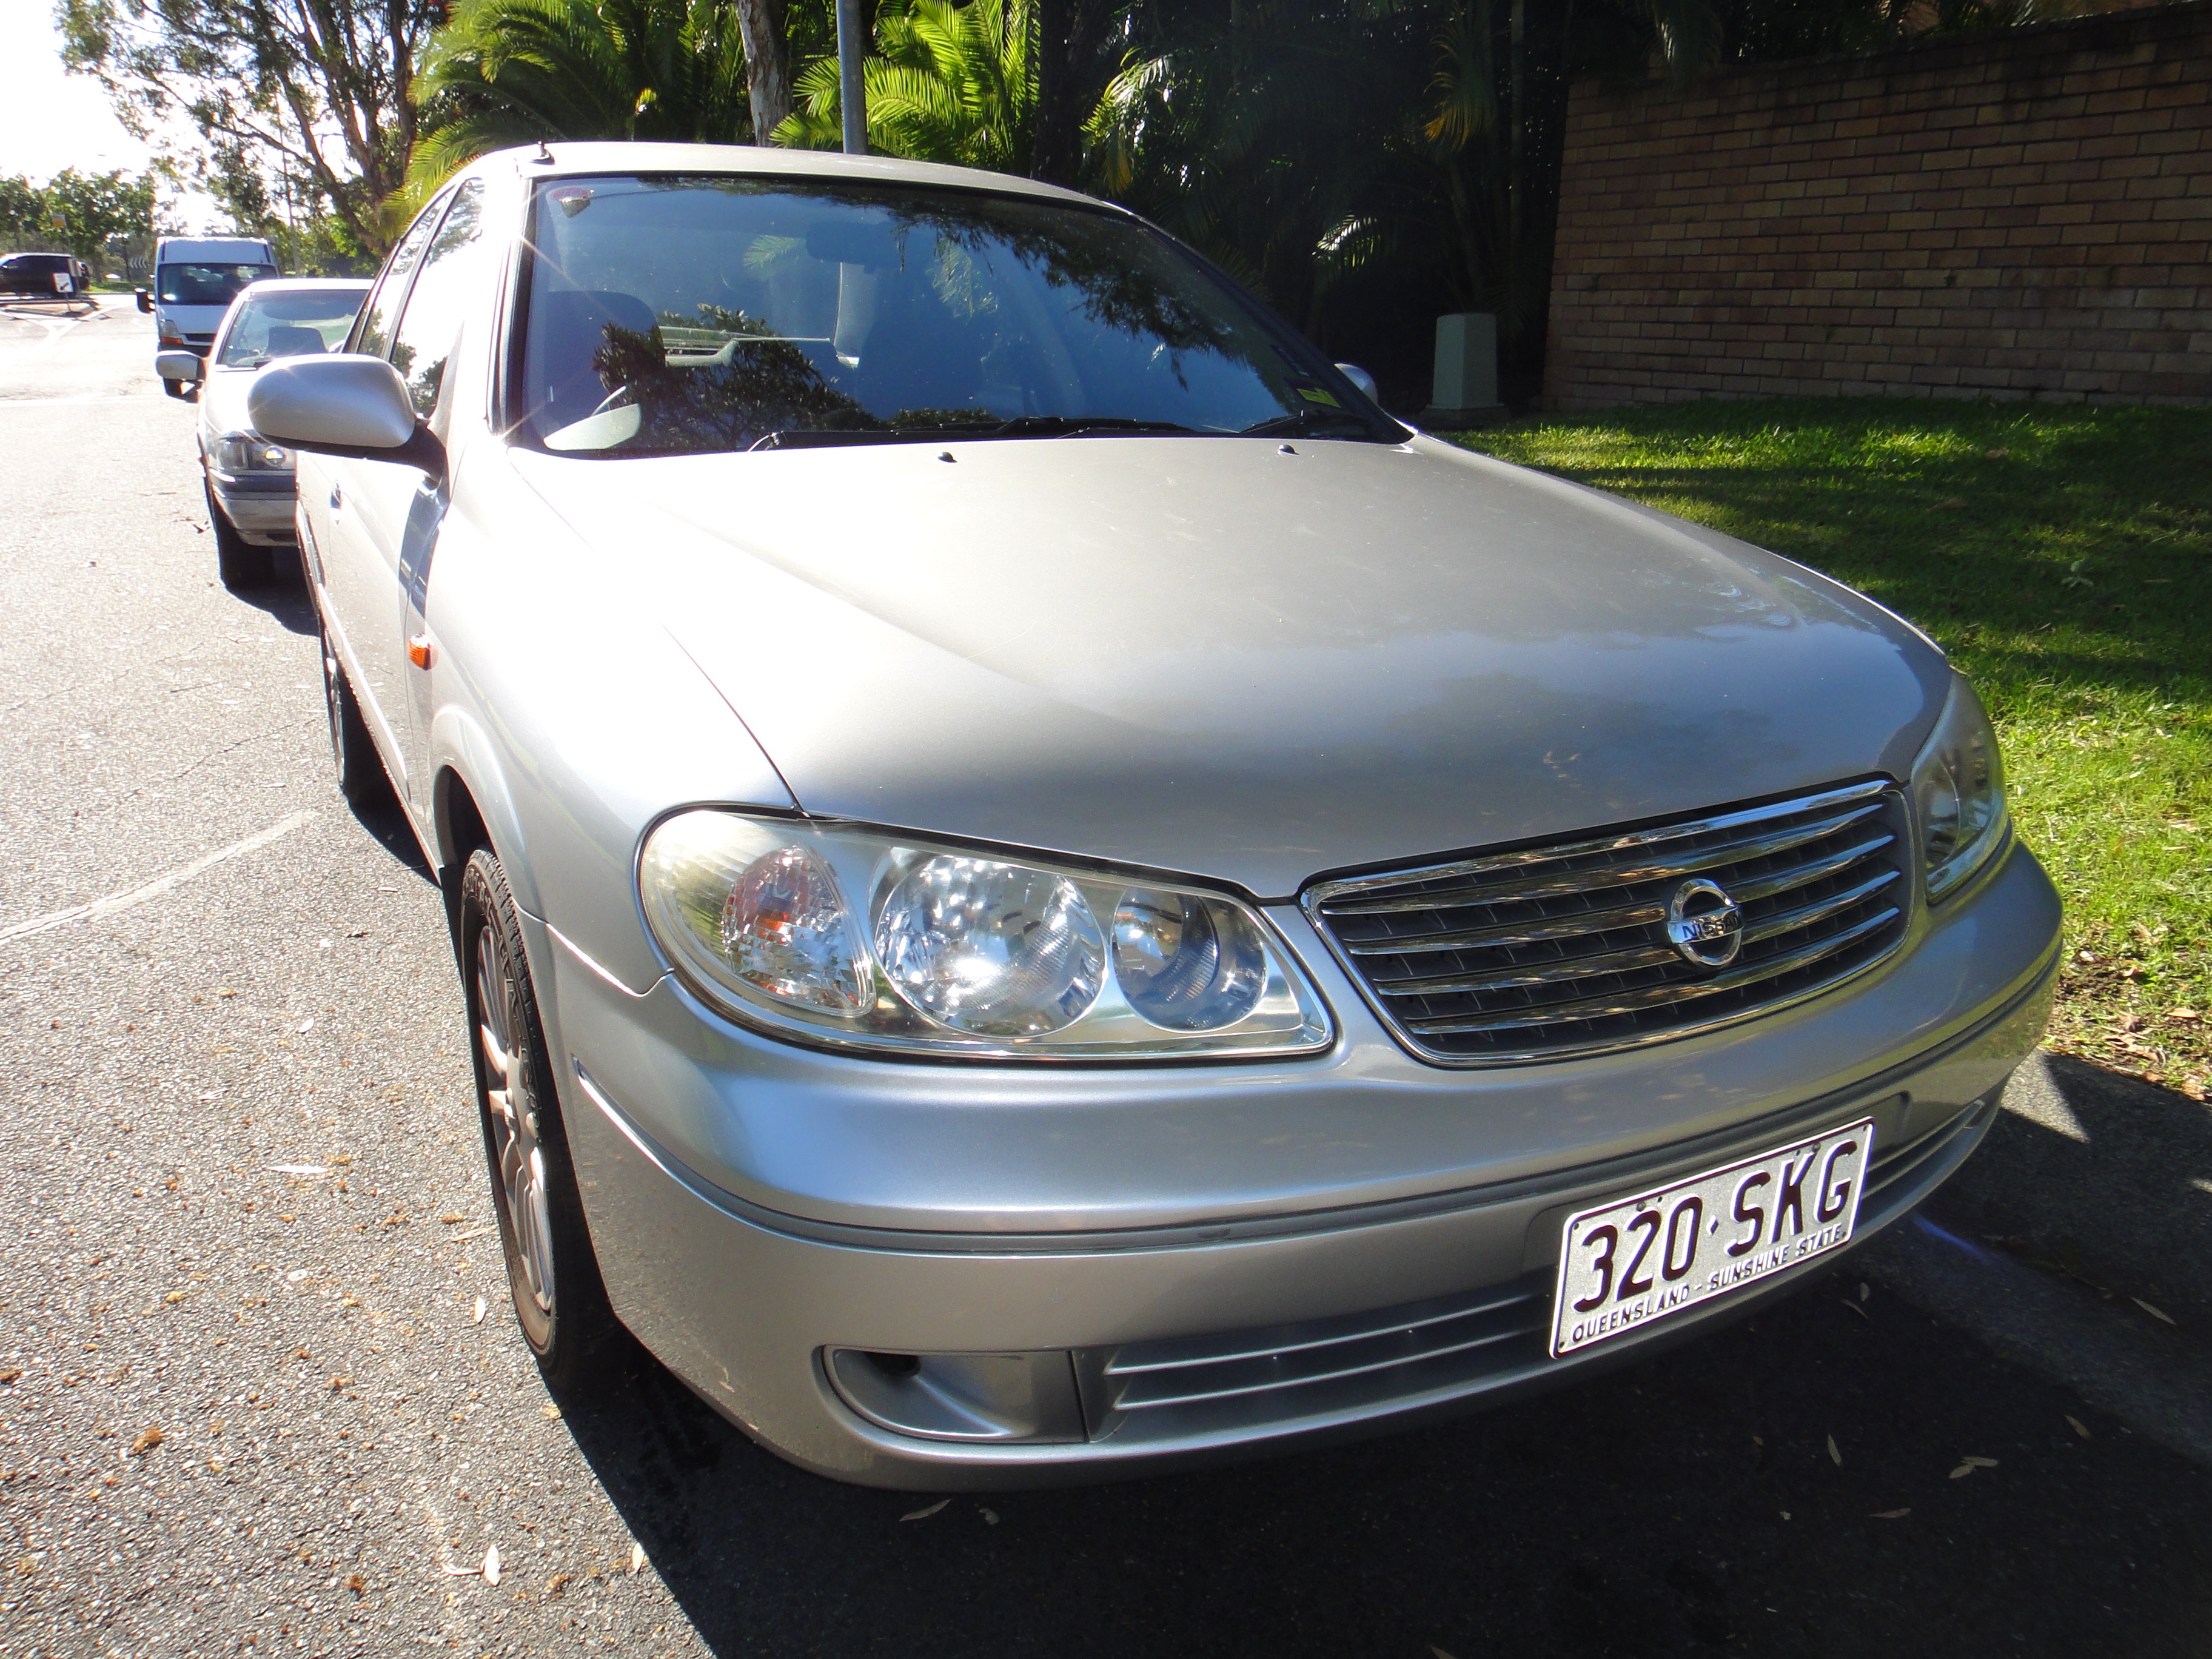 Nissan pulsar spare parts adelaide